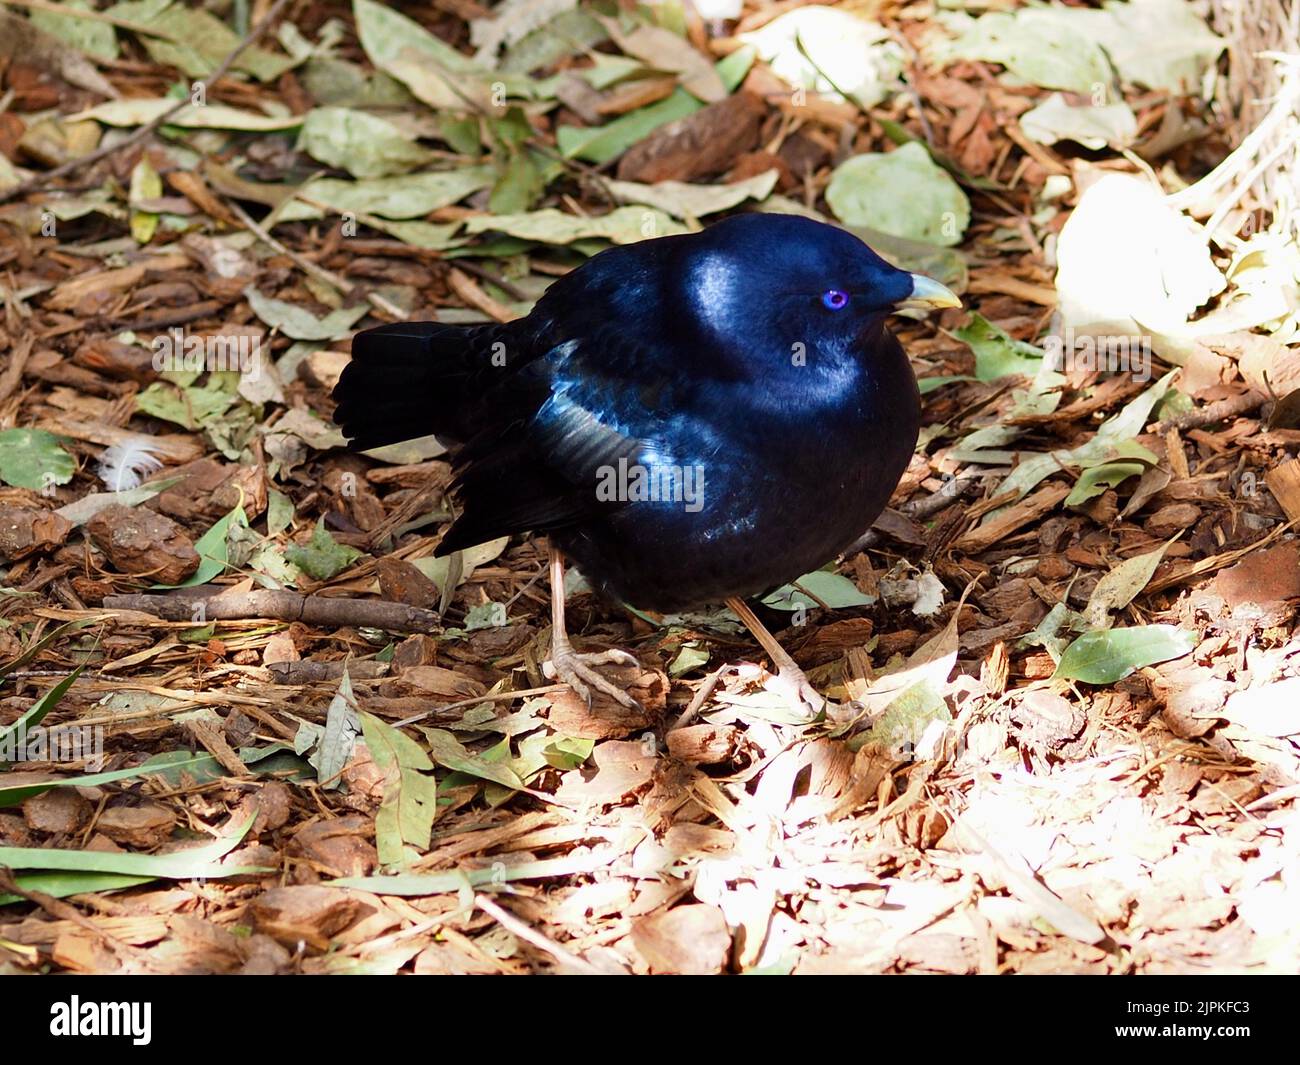 Exquisite showy male Satin Bowerbird with bright glossy midnight blue plumage. Stock Photo